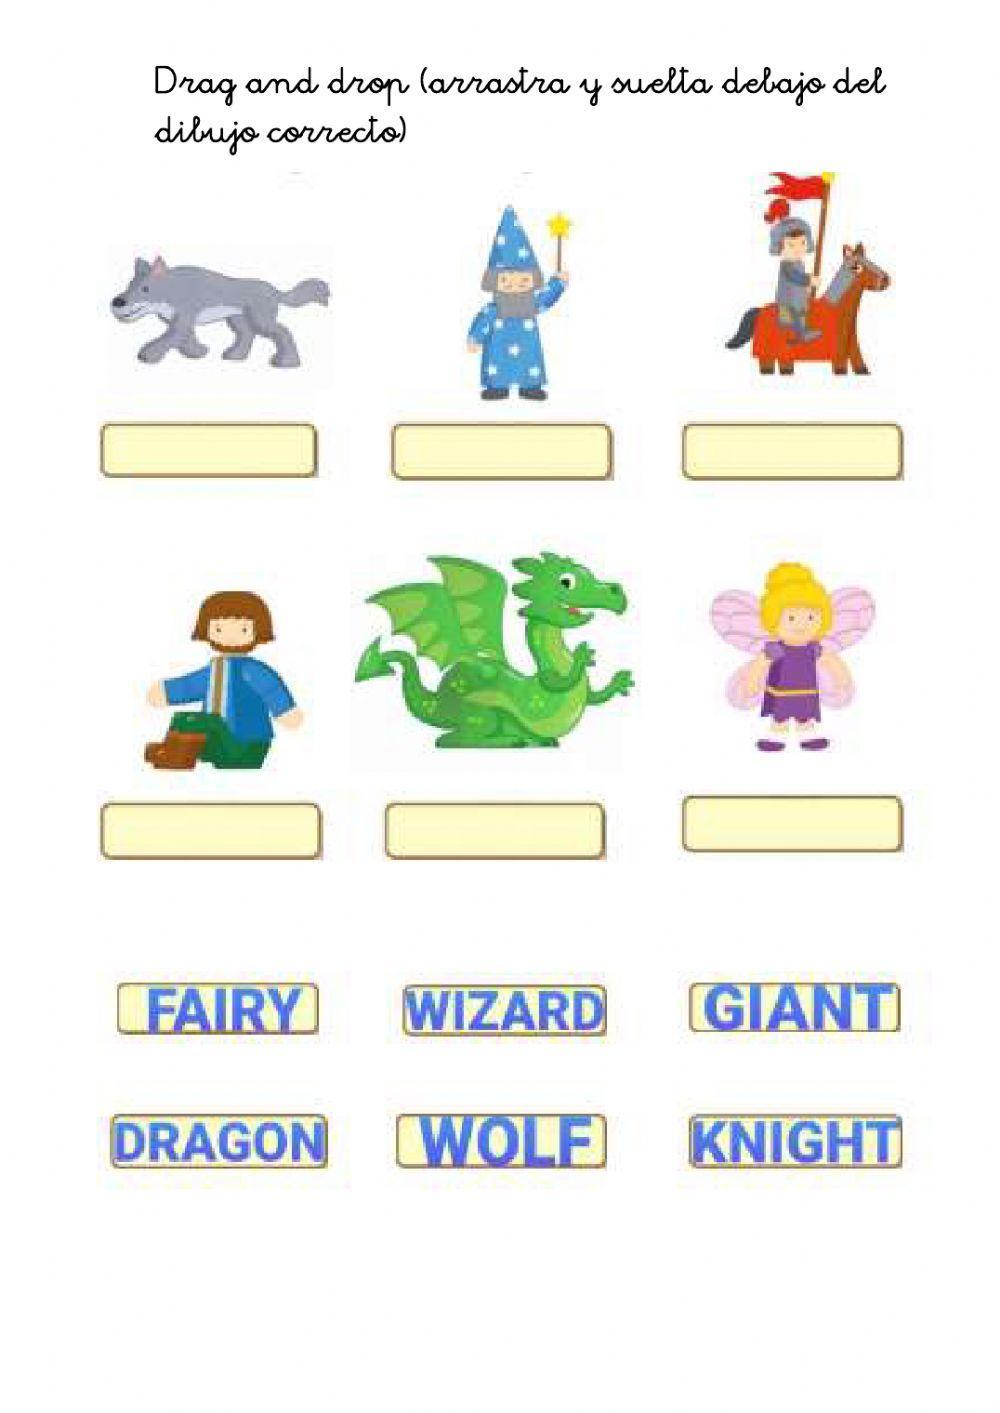 Fairy tale characters